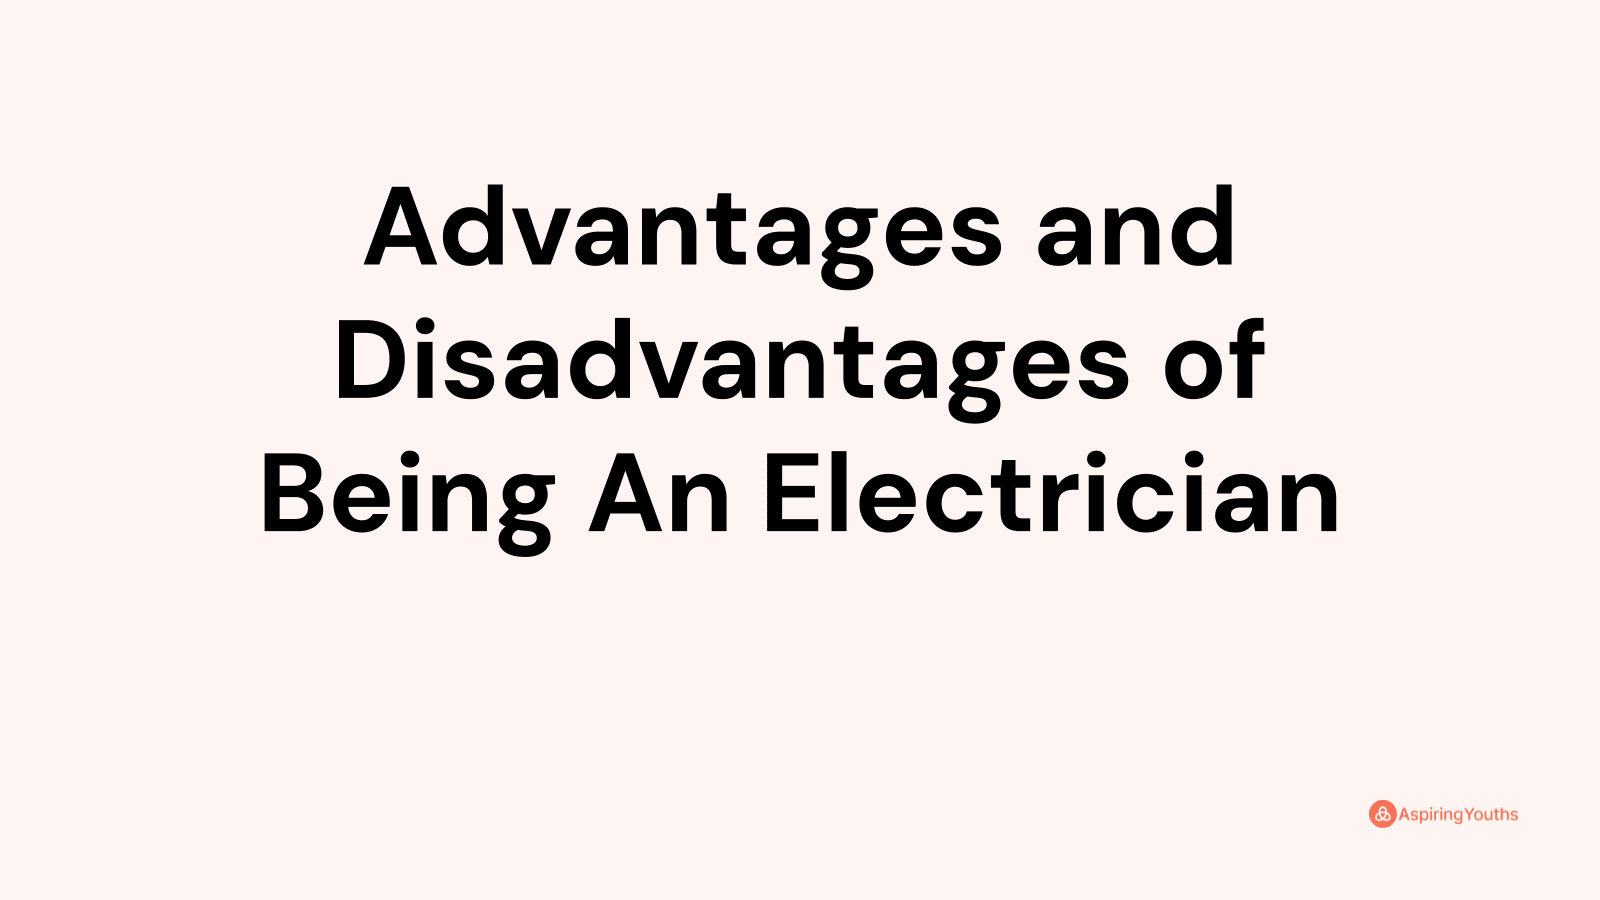 Advantages and disadvantages of Being An Electrician